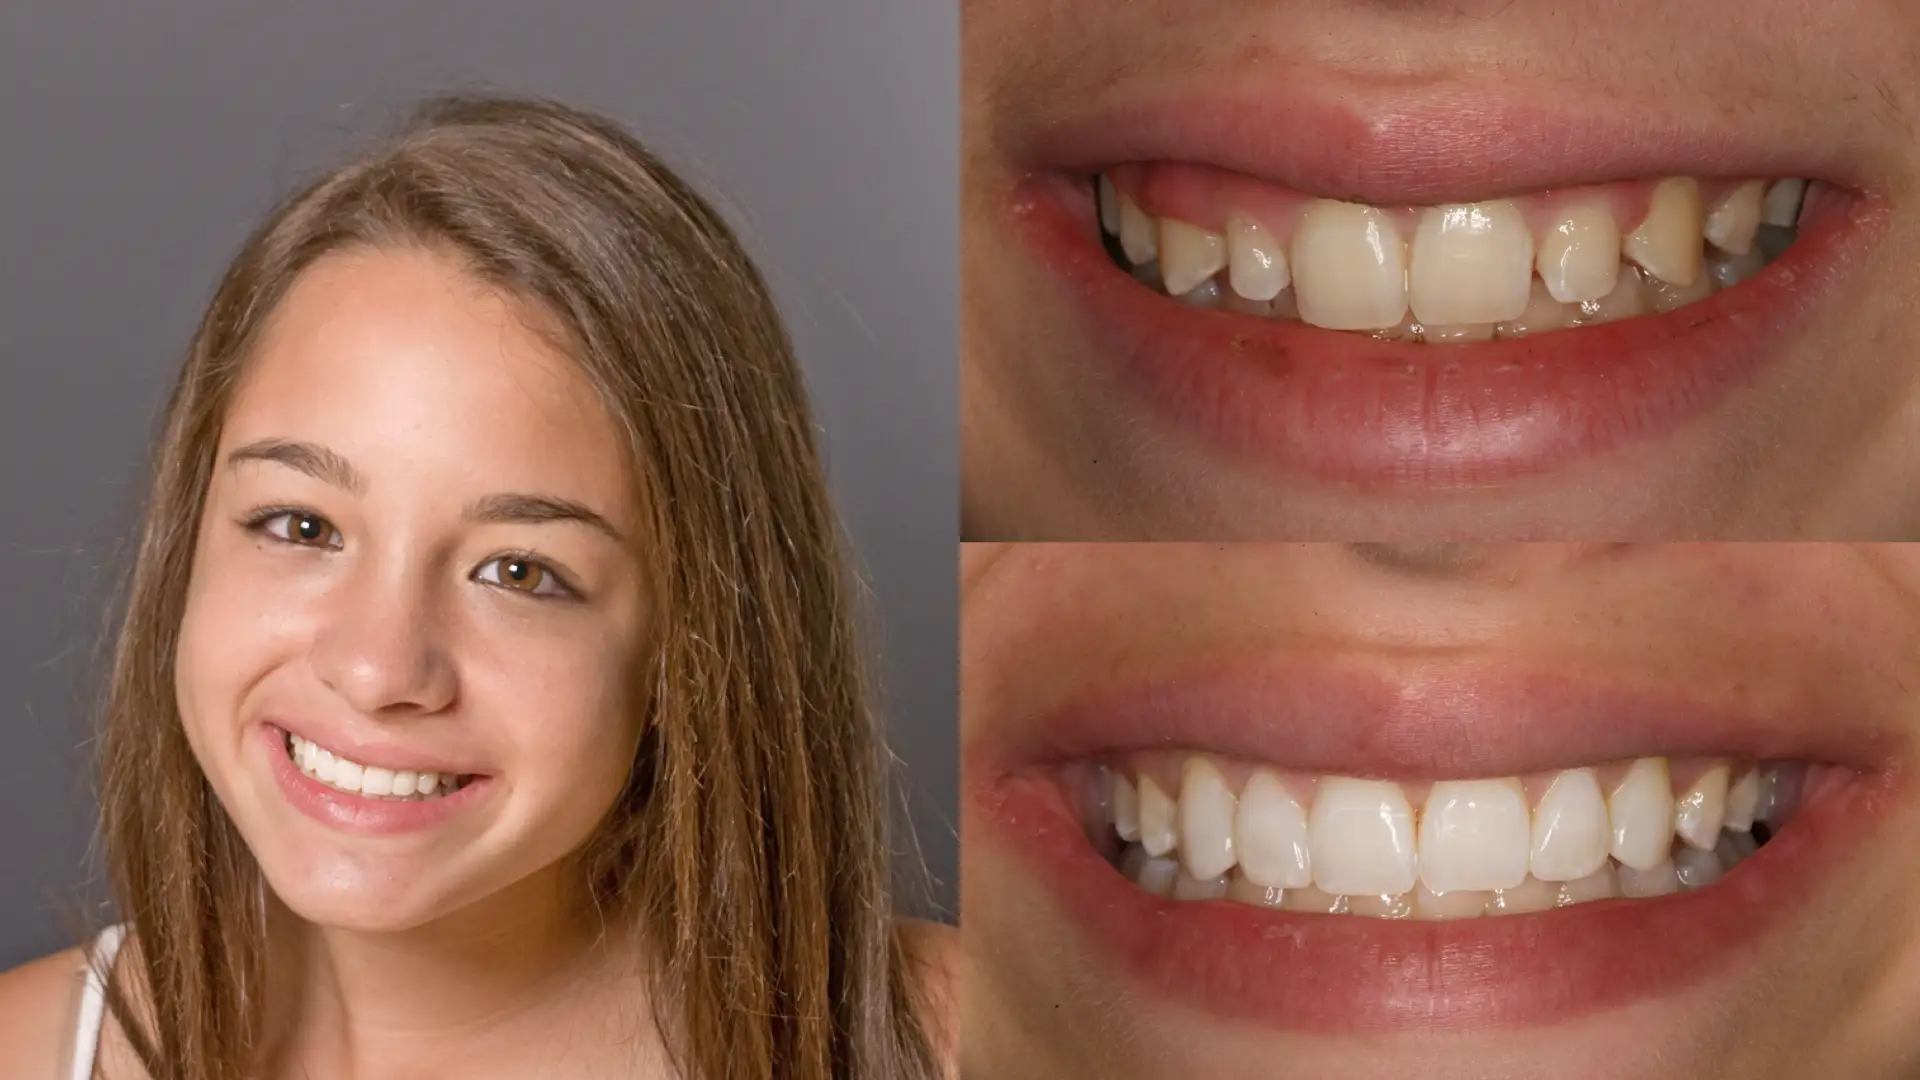 teeth-bonding-before-and-after-by-webmedies-com